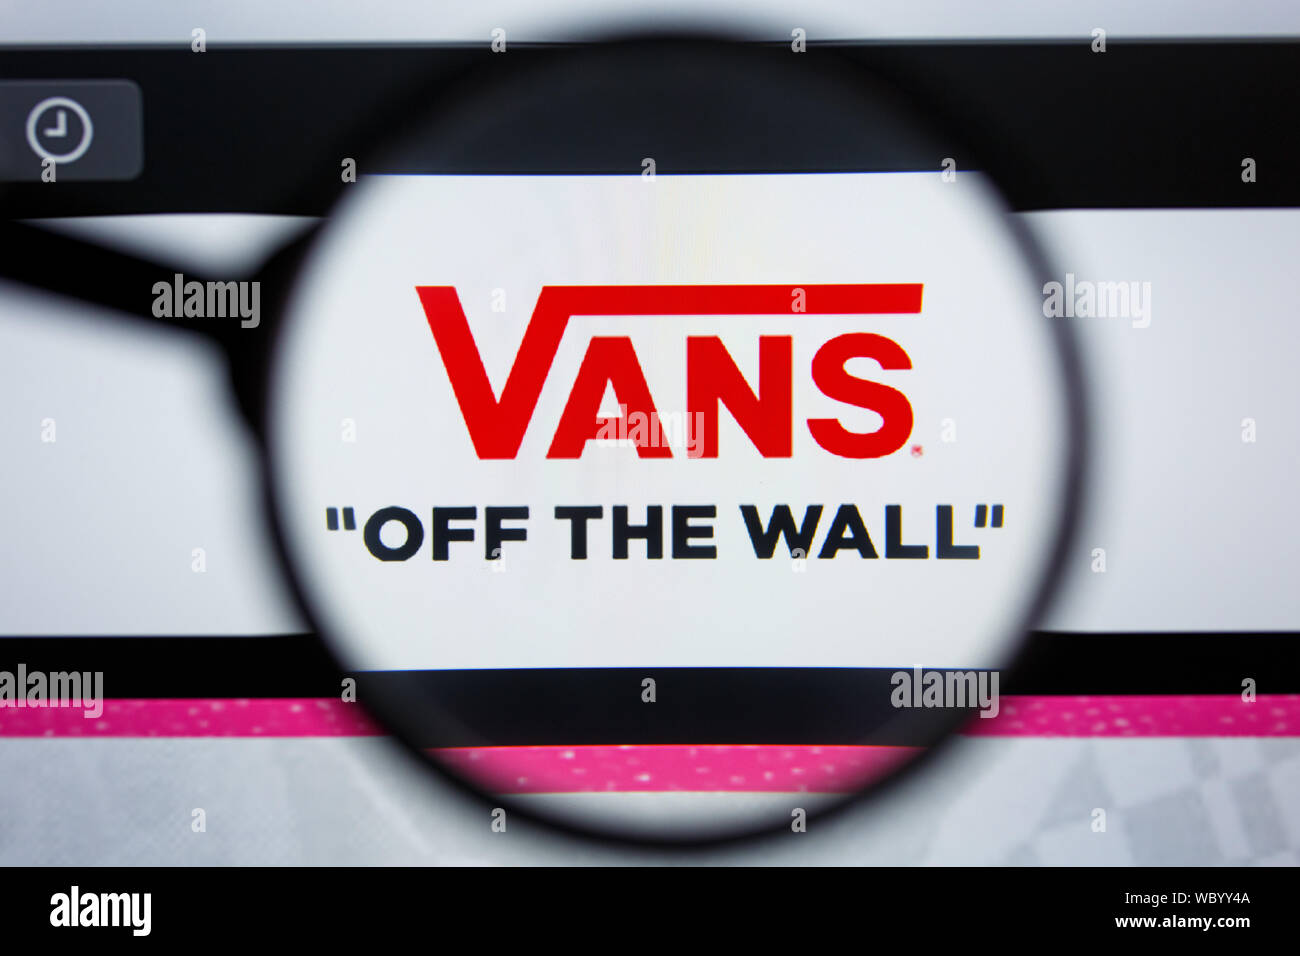 Los Angeles, California, USA - 21 Jule 2019: Illustrative Editorial of VANS.COM  website homepage. VANS OFF THE WALL logo visible on display screen Stock  Photo - Alamy